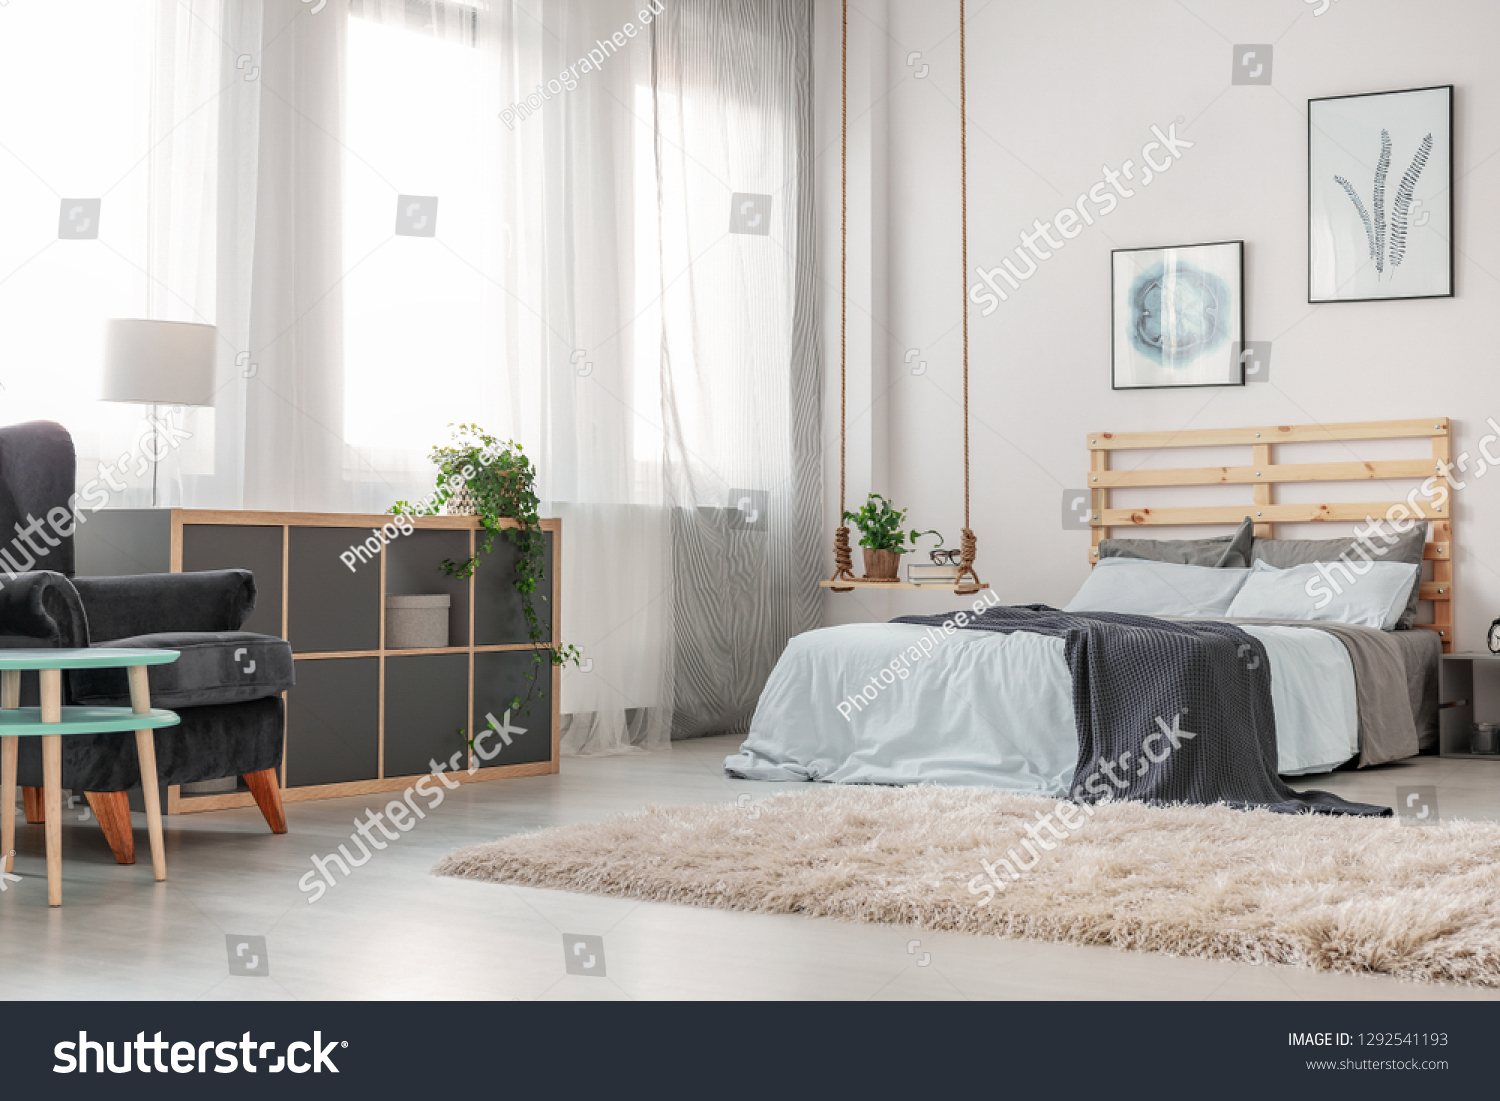 Fluffy white carpet on the floor of trendy bedroom with king size bed with wooden headboard, posters on the wall and fashionable swing as nightstand #1292541193